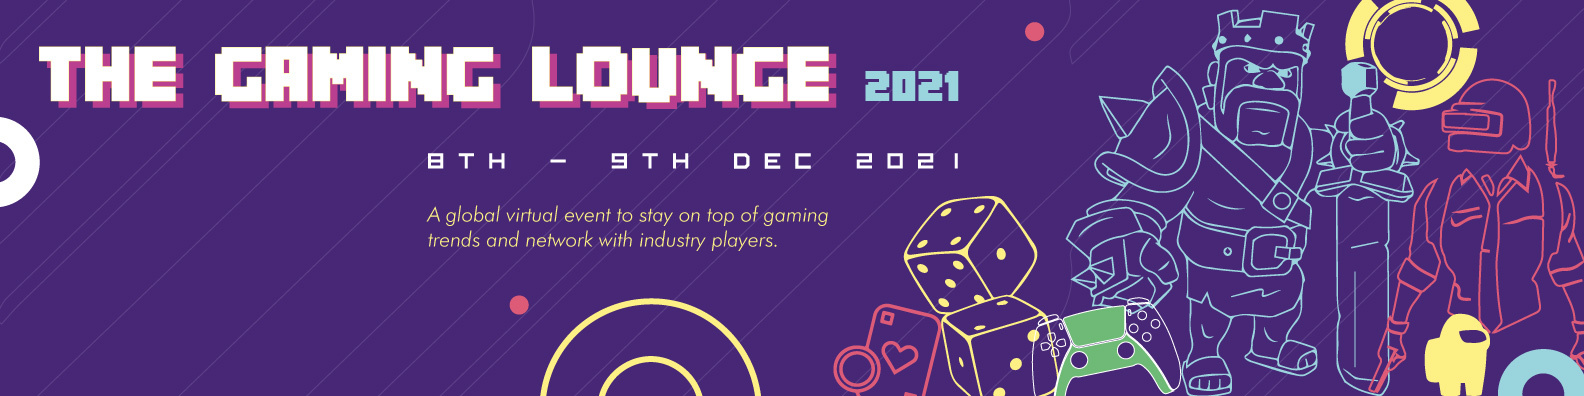 The Gaming Lounge 2021, Online Event